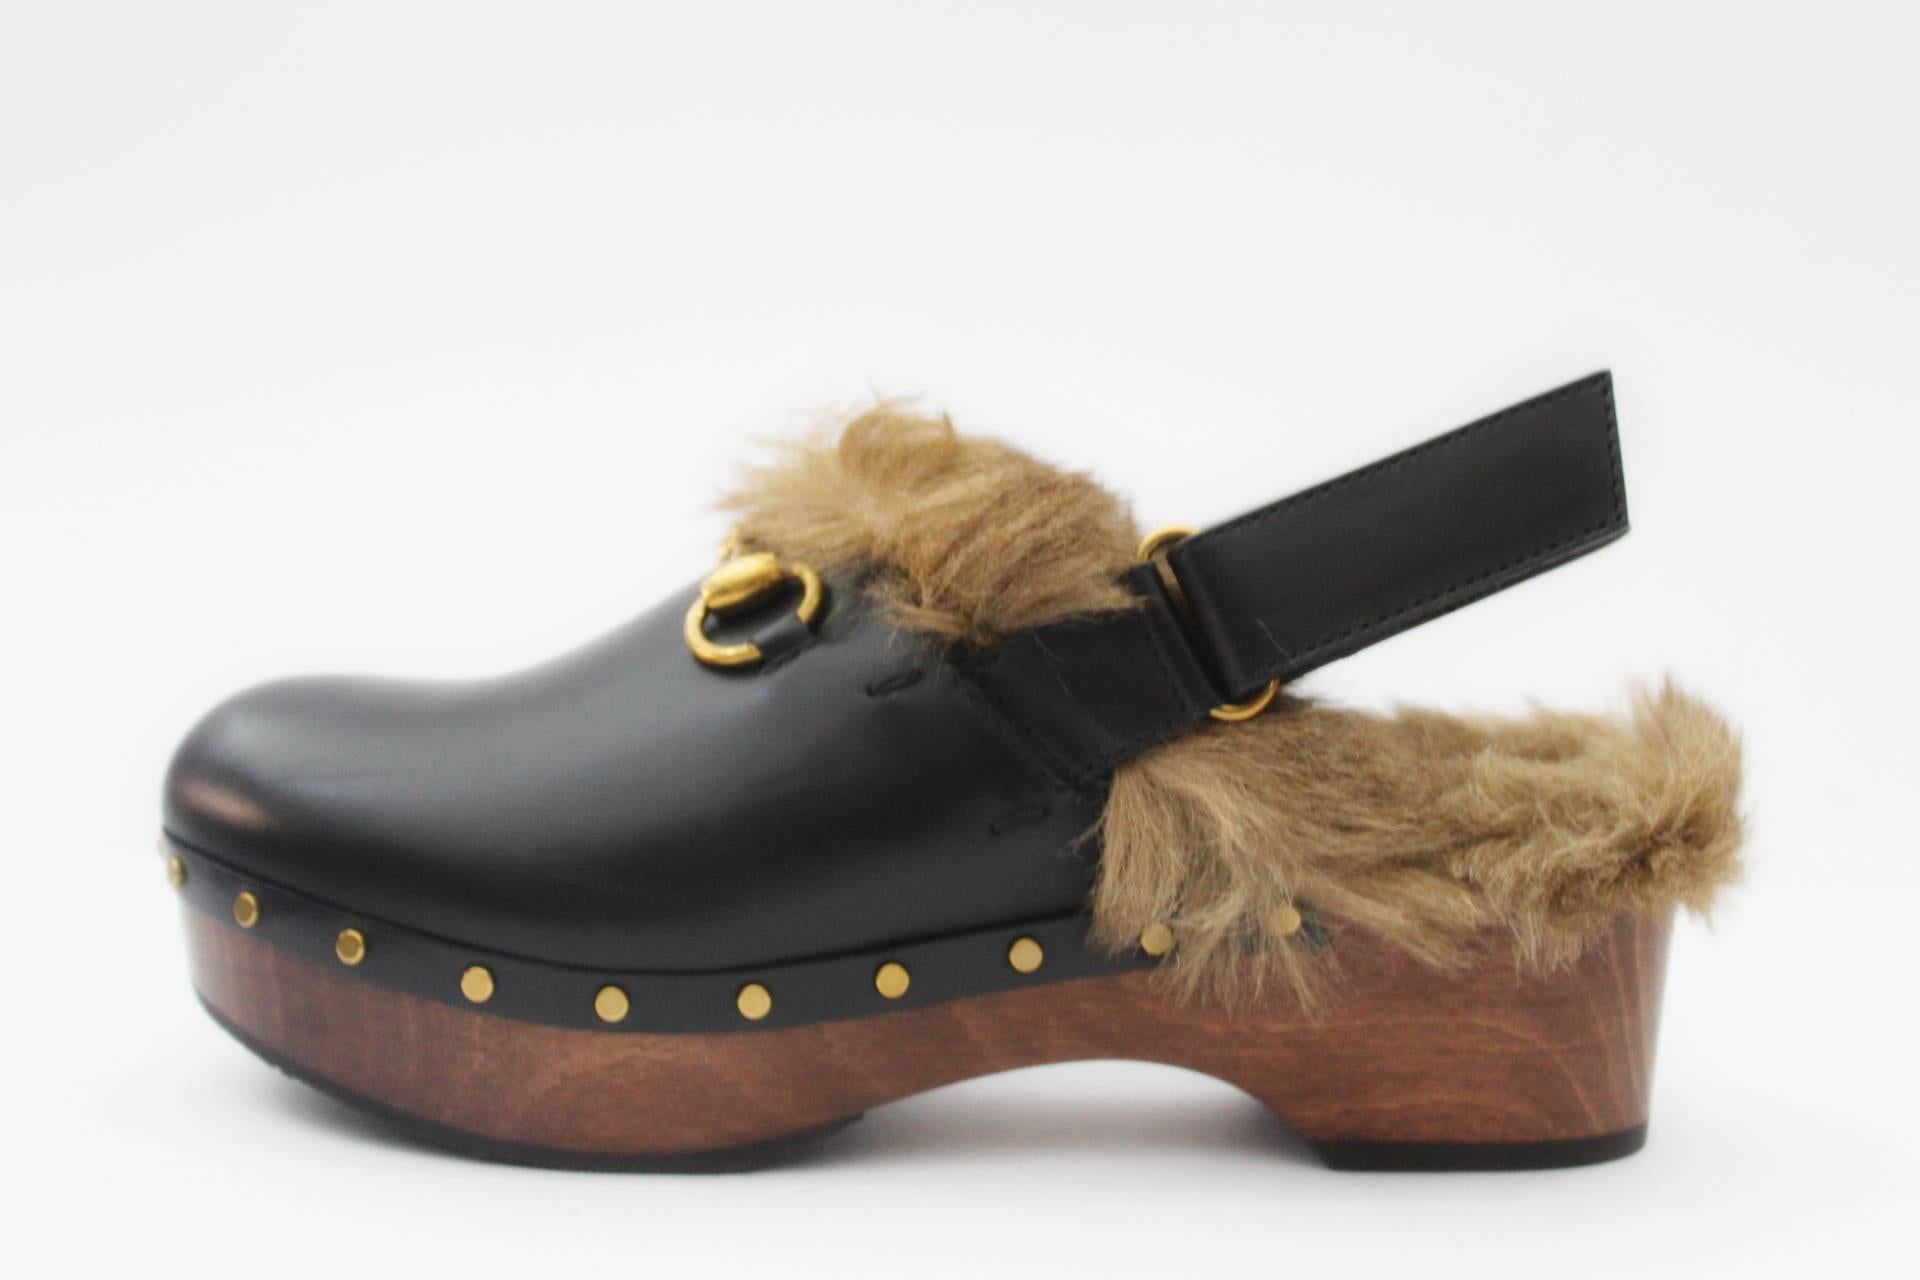 Fully lined and trimmed with kangaroo fur, this leather clog features gold studs and our signature Horsebit detail. Perfect conditions with dust and box. Number 38 EU